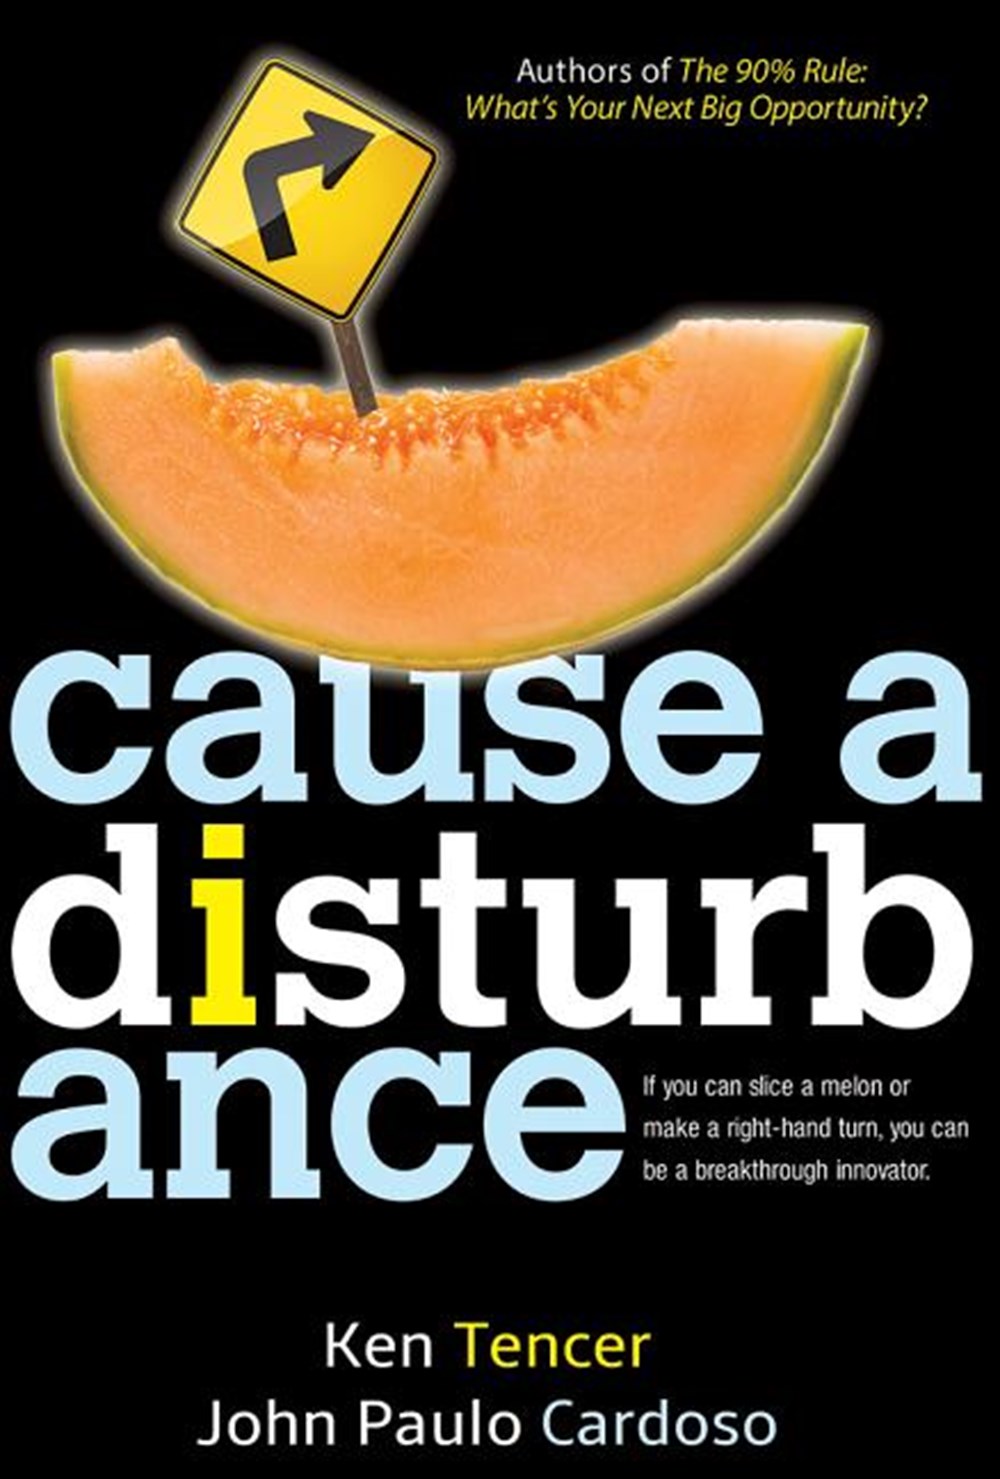 Cause a Disturbance: If You Can Slice a Melon or Make a Right-Hand Turn, You Can Be a Breakthrough I